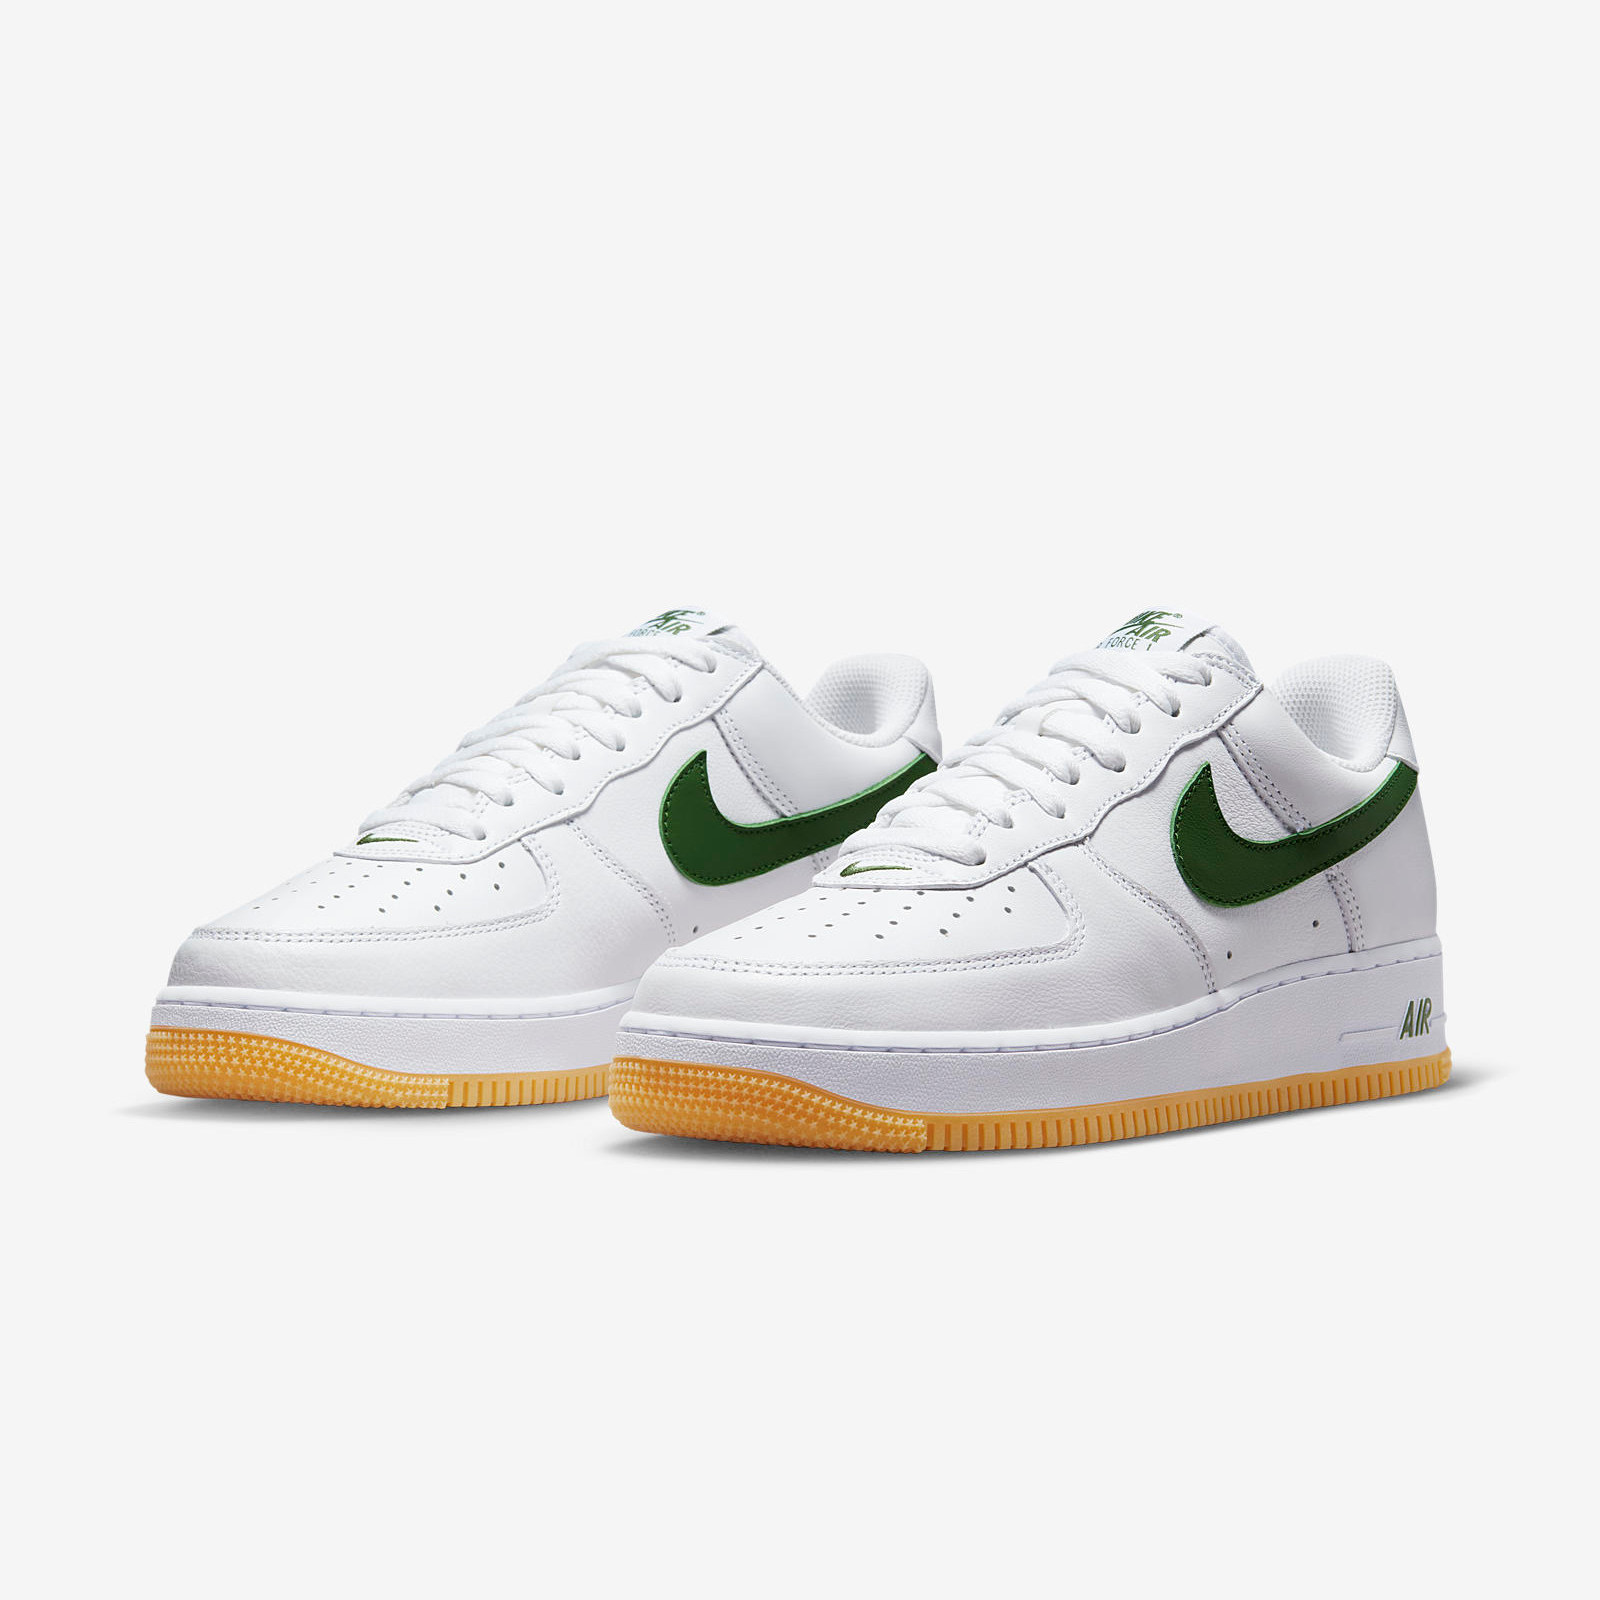 Nike Air Force 1 Low
Color of the Month
Forest Green